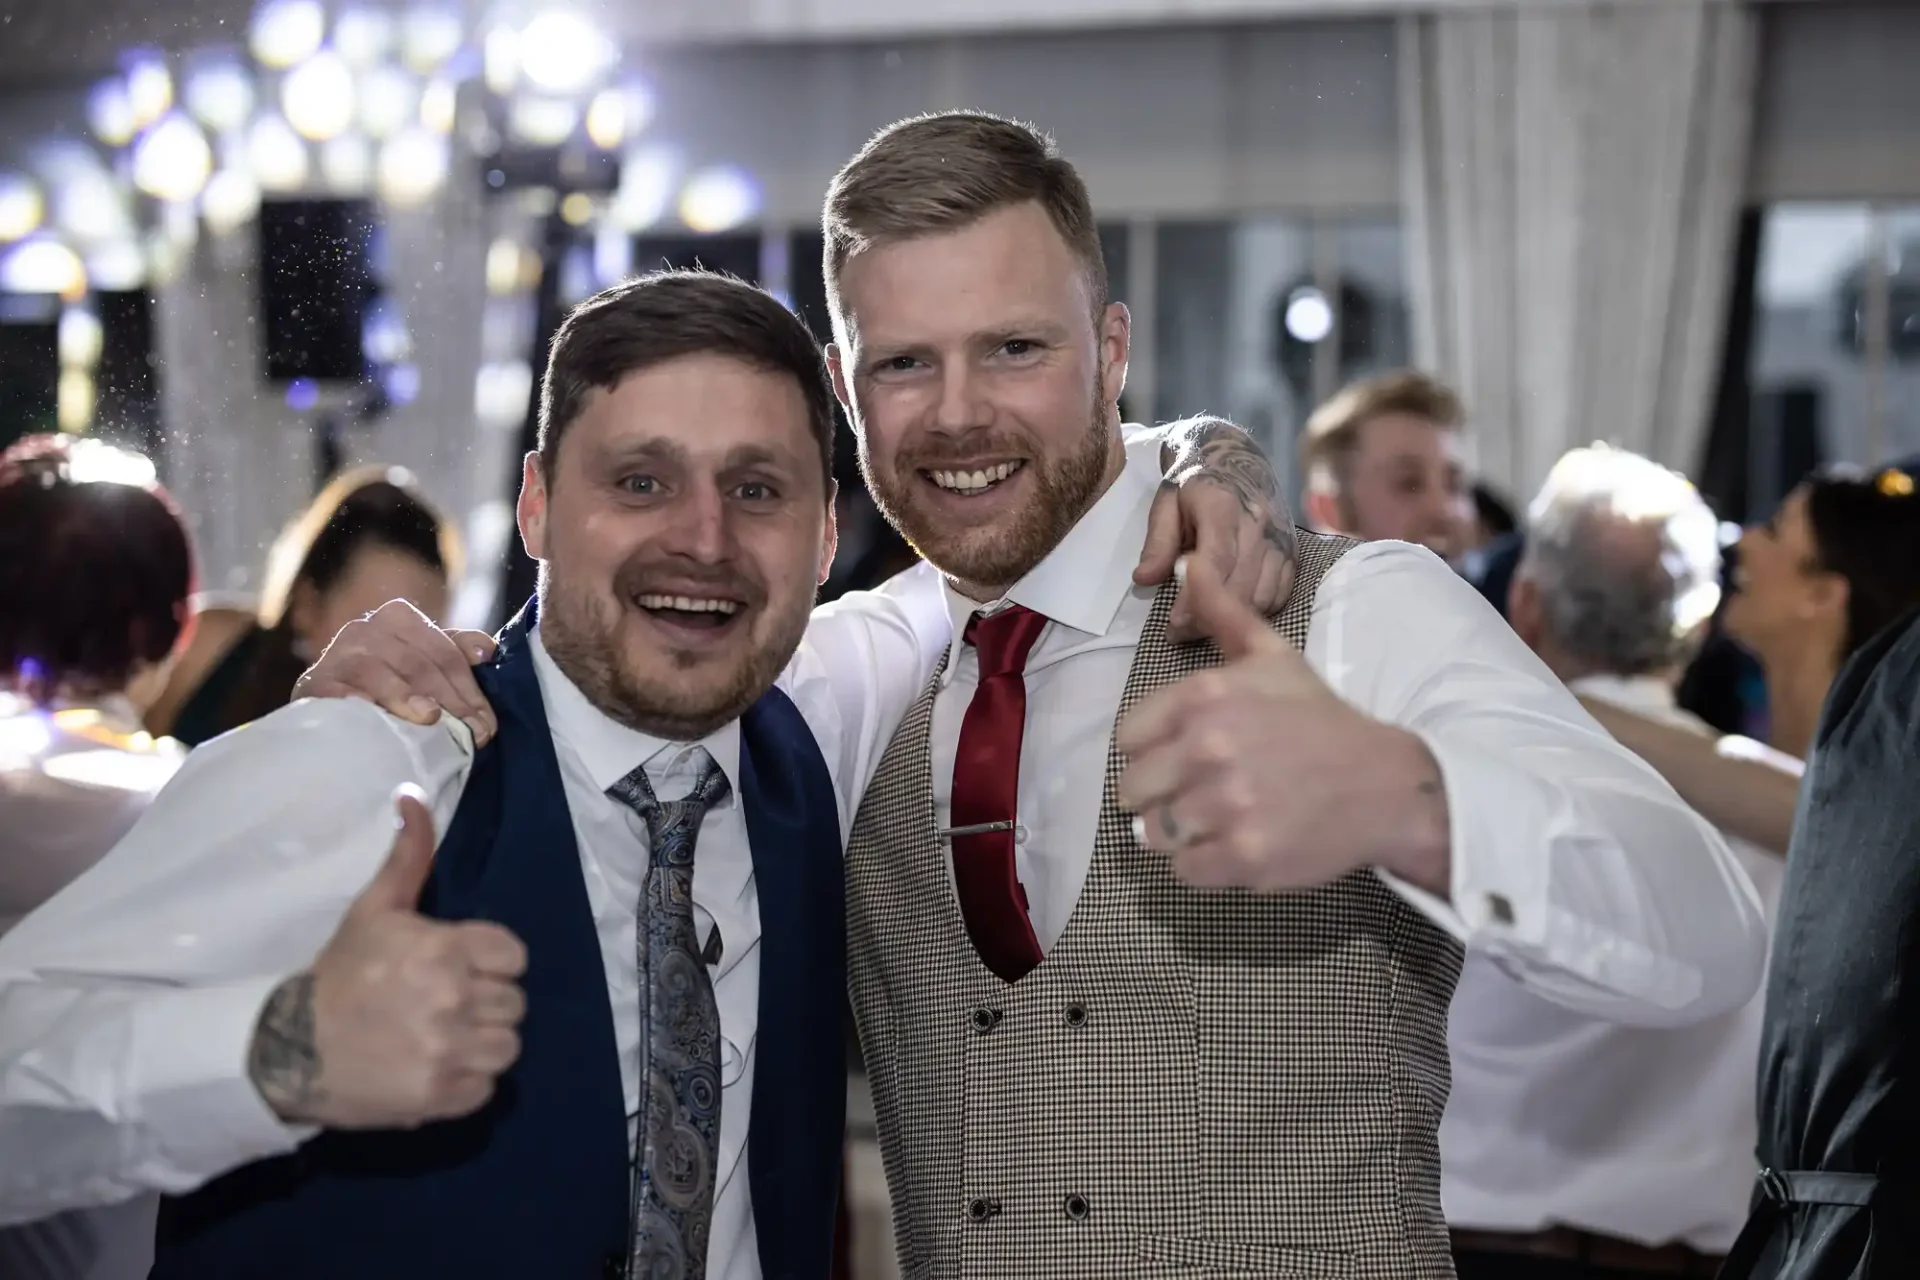 Two joyful men in formal attire giving thumbs up at a festive event with blurred guests and lights in the background.